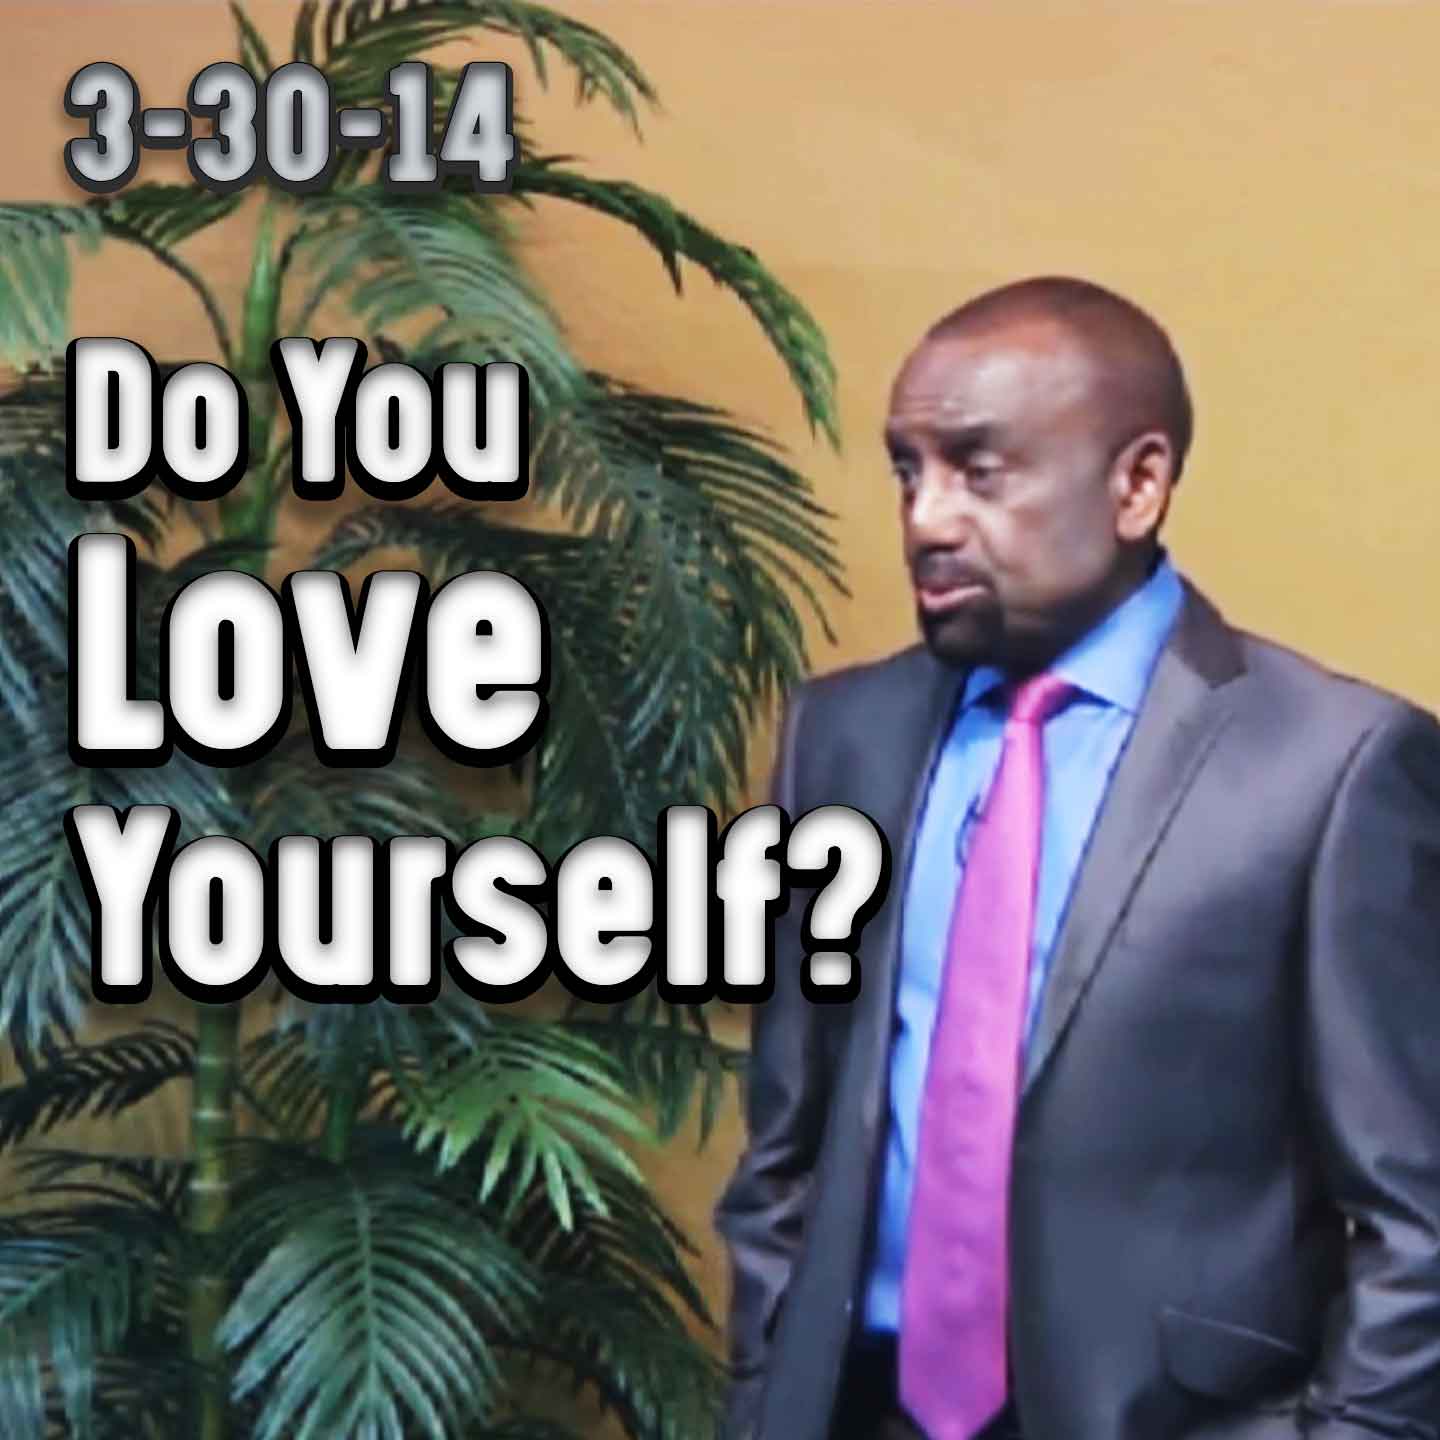 Do you love yourself? Archive Service 3/30/14